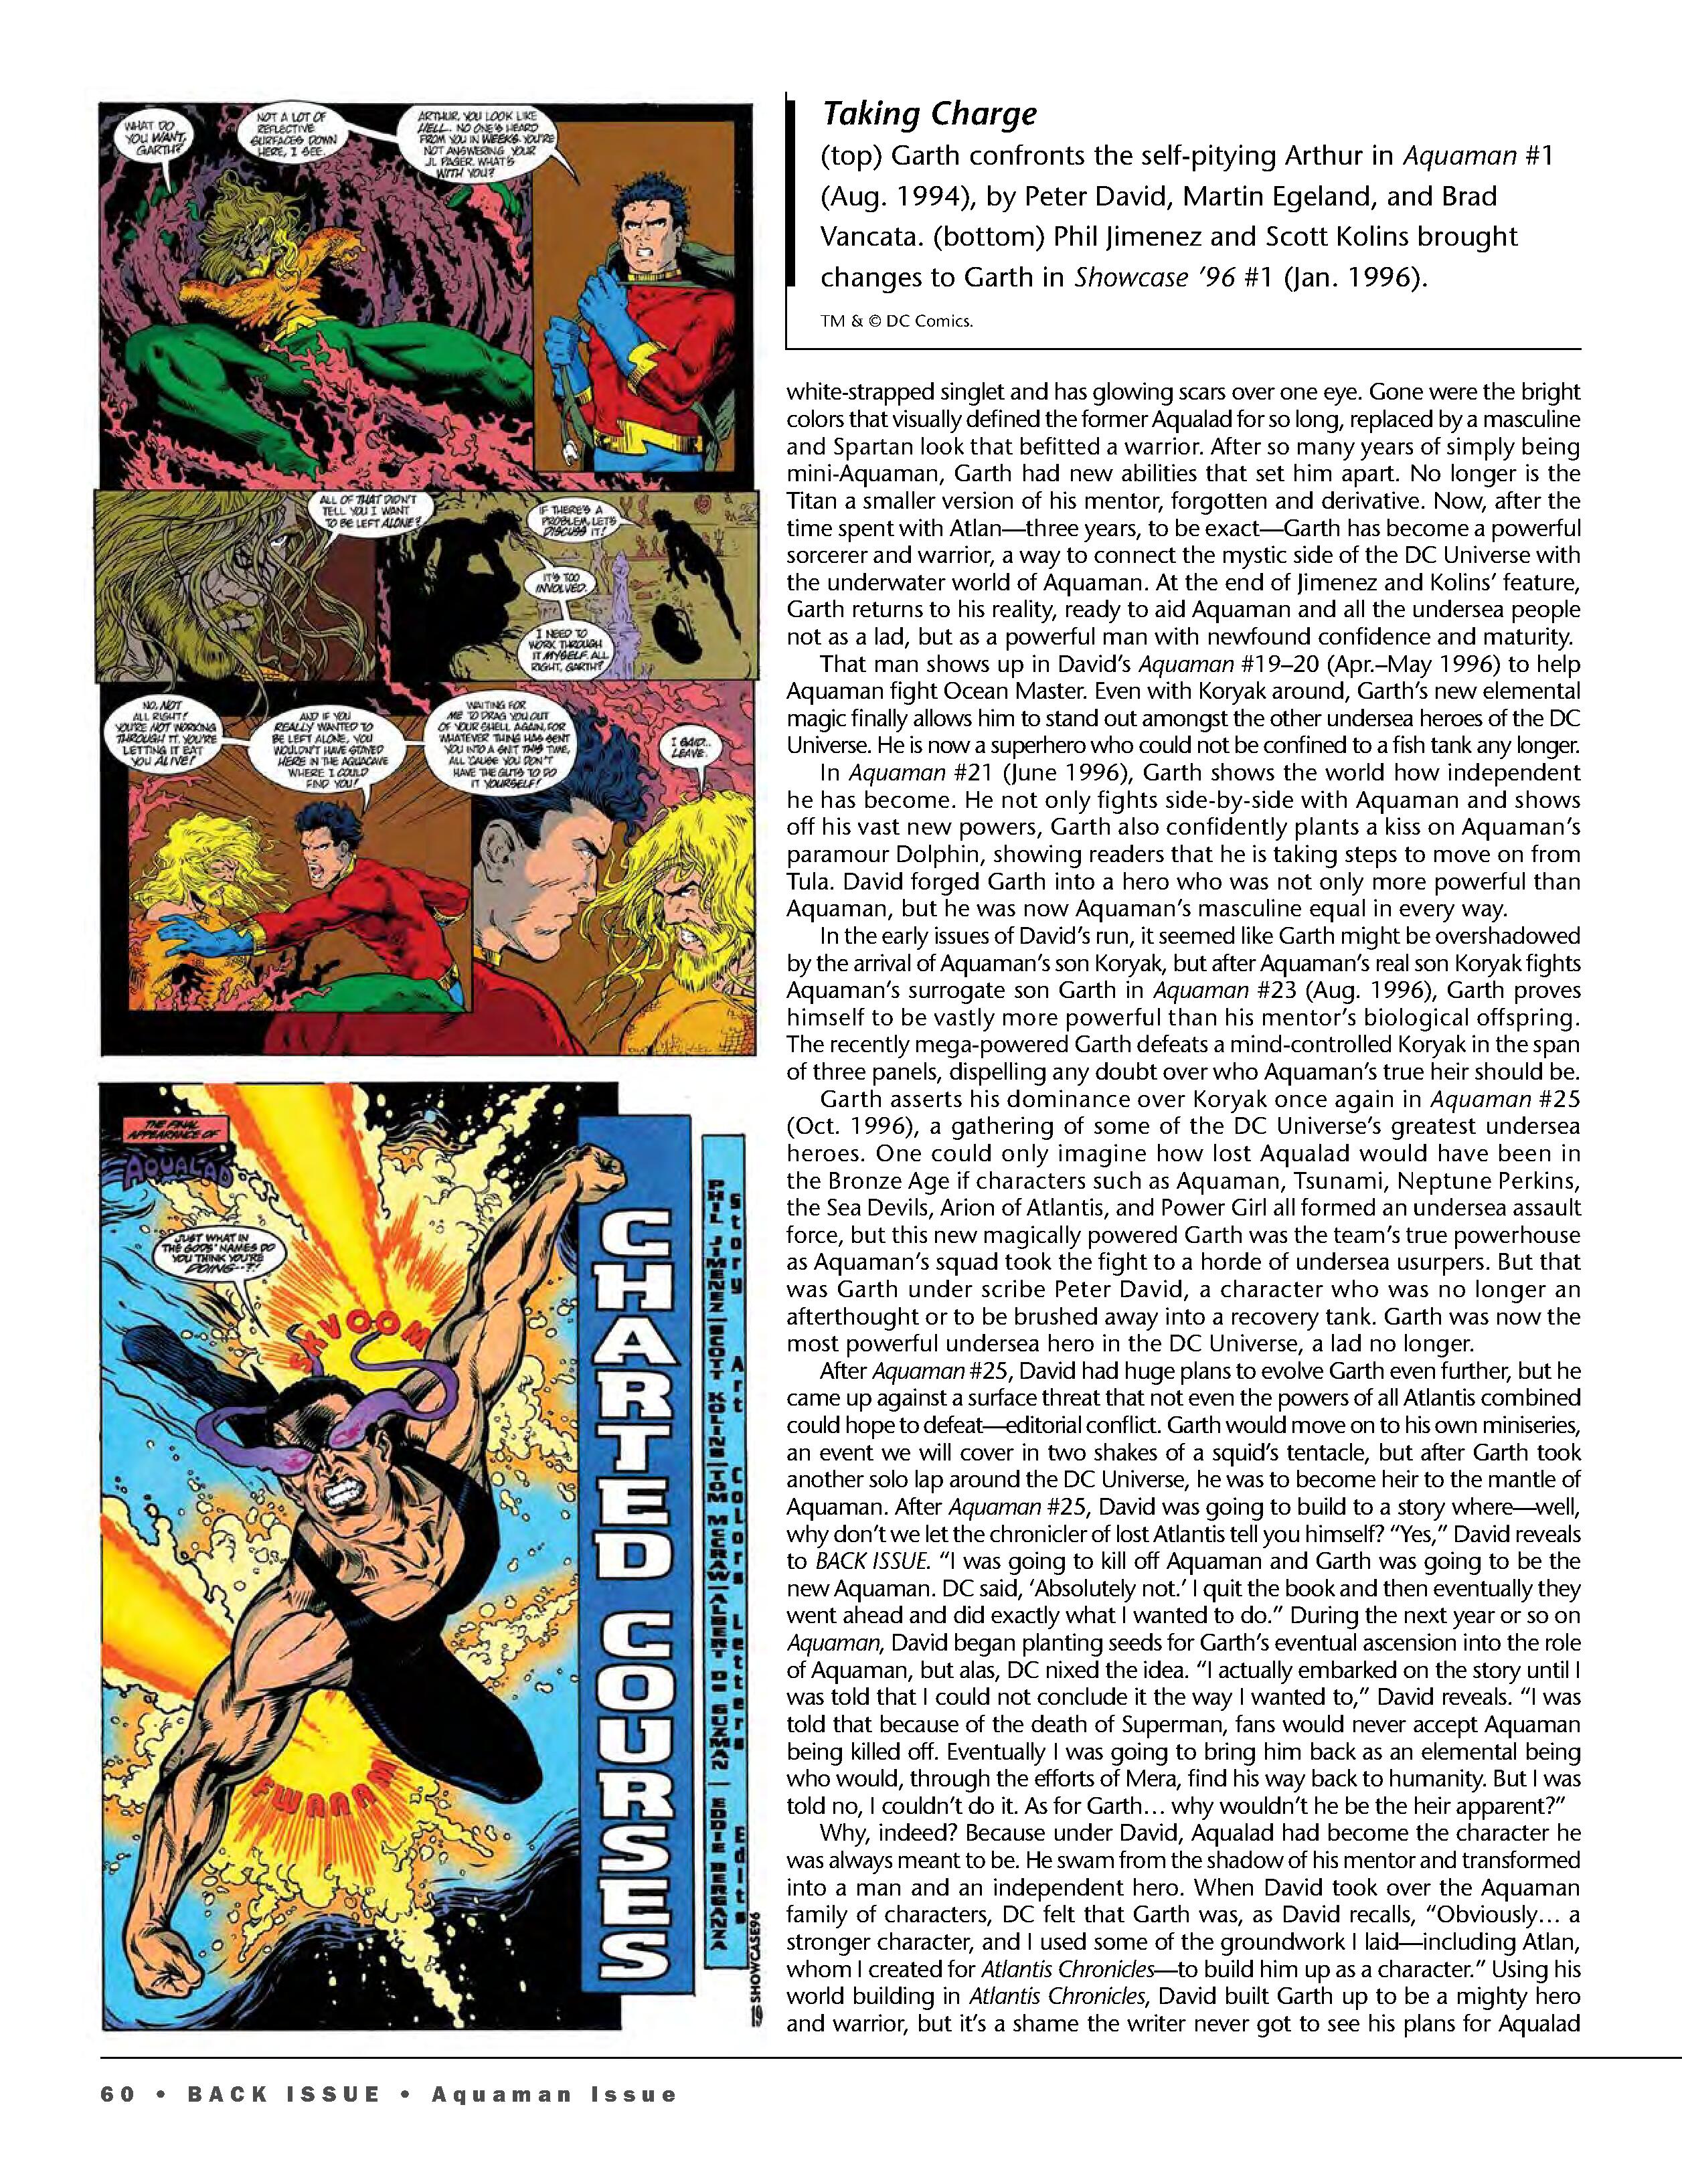 Read online Back Issue comic -  Issue #108 - 62